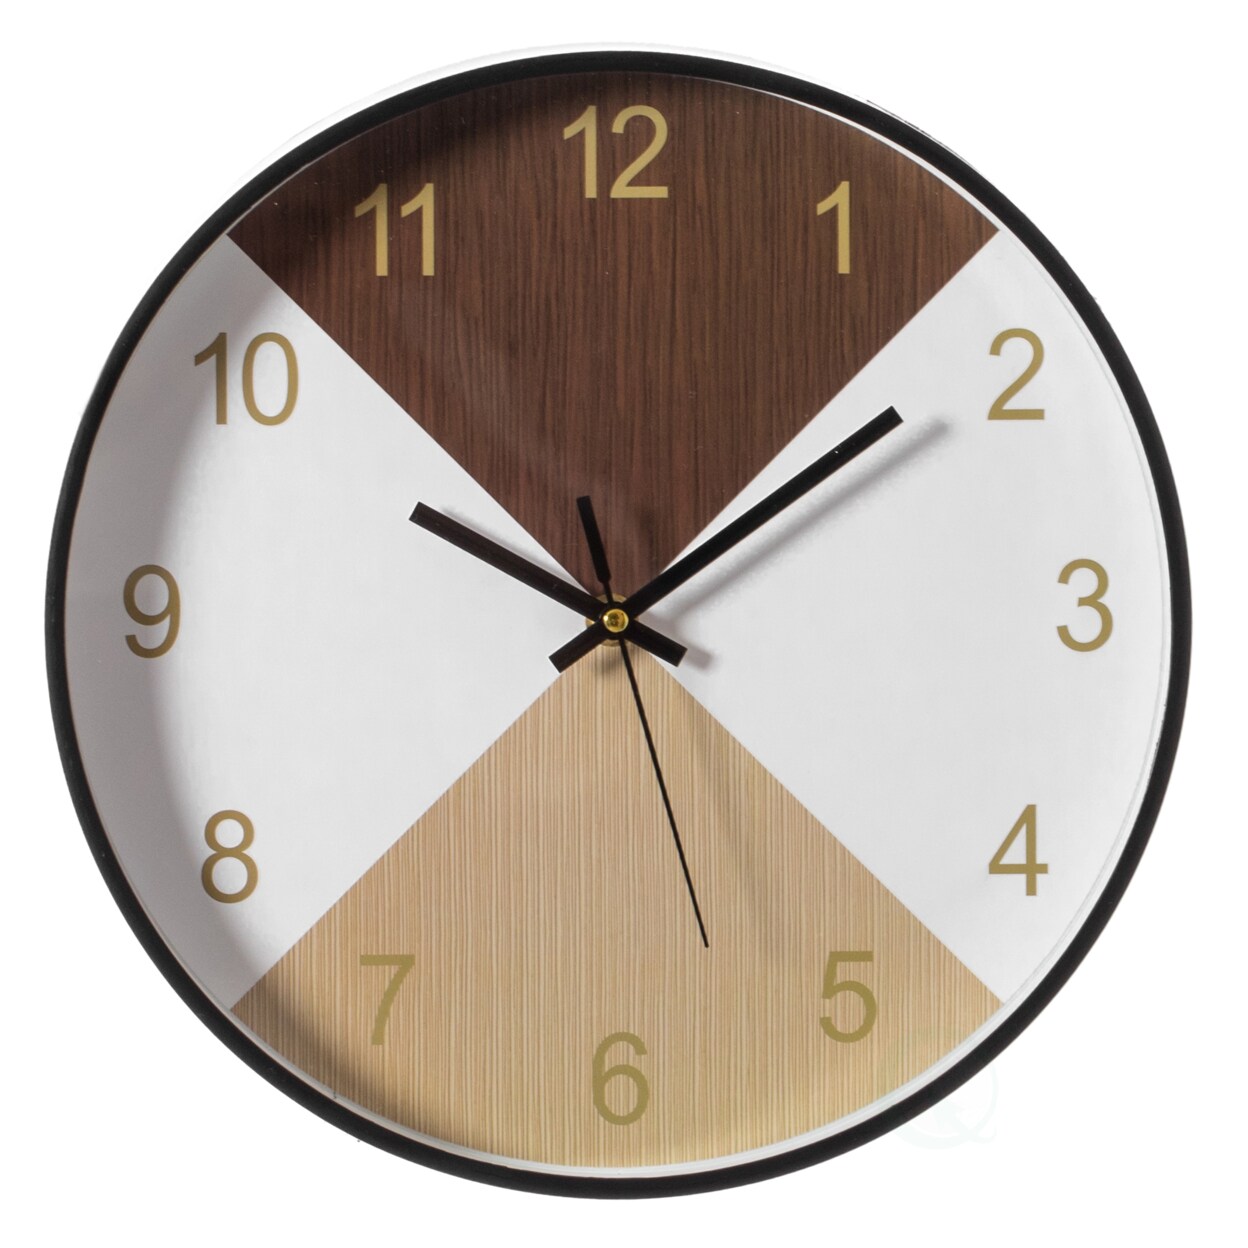 Quickway Imports Decorative Modern Round Wood- Looking Plastic Wall Clock for Living Room Kitchen or Dining Room